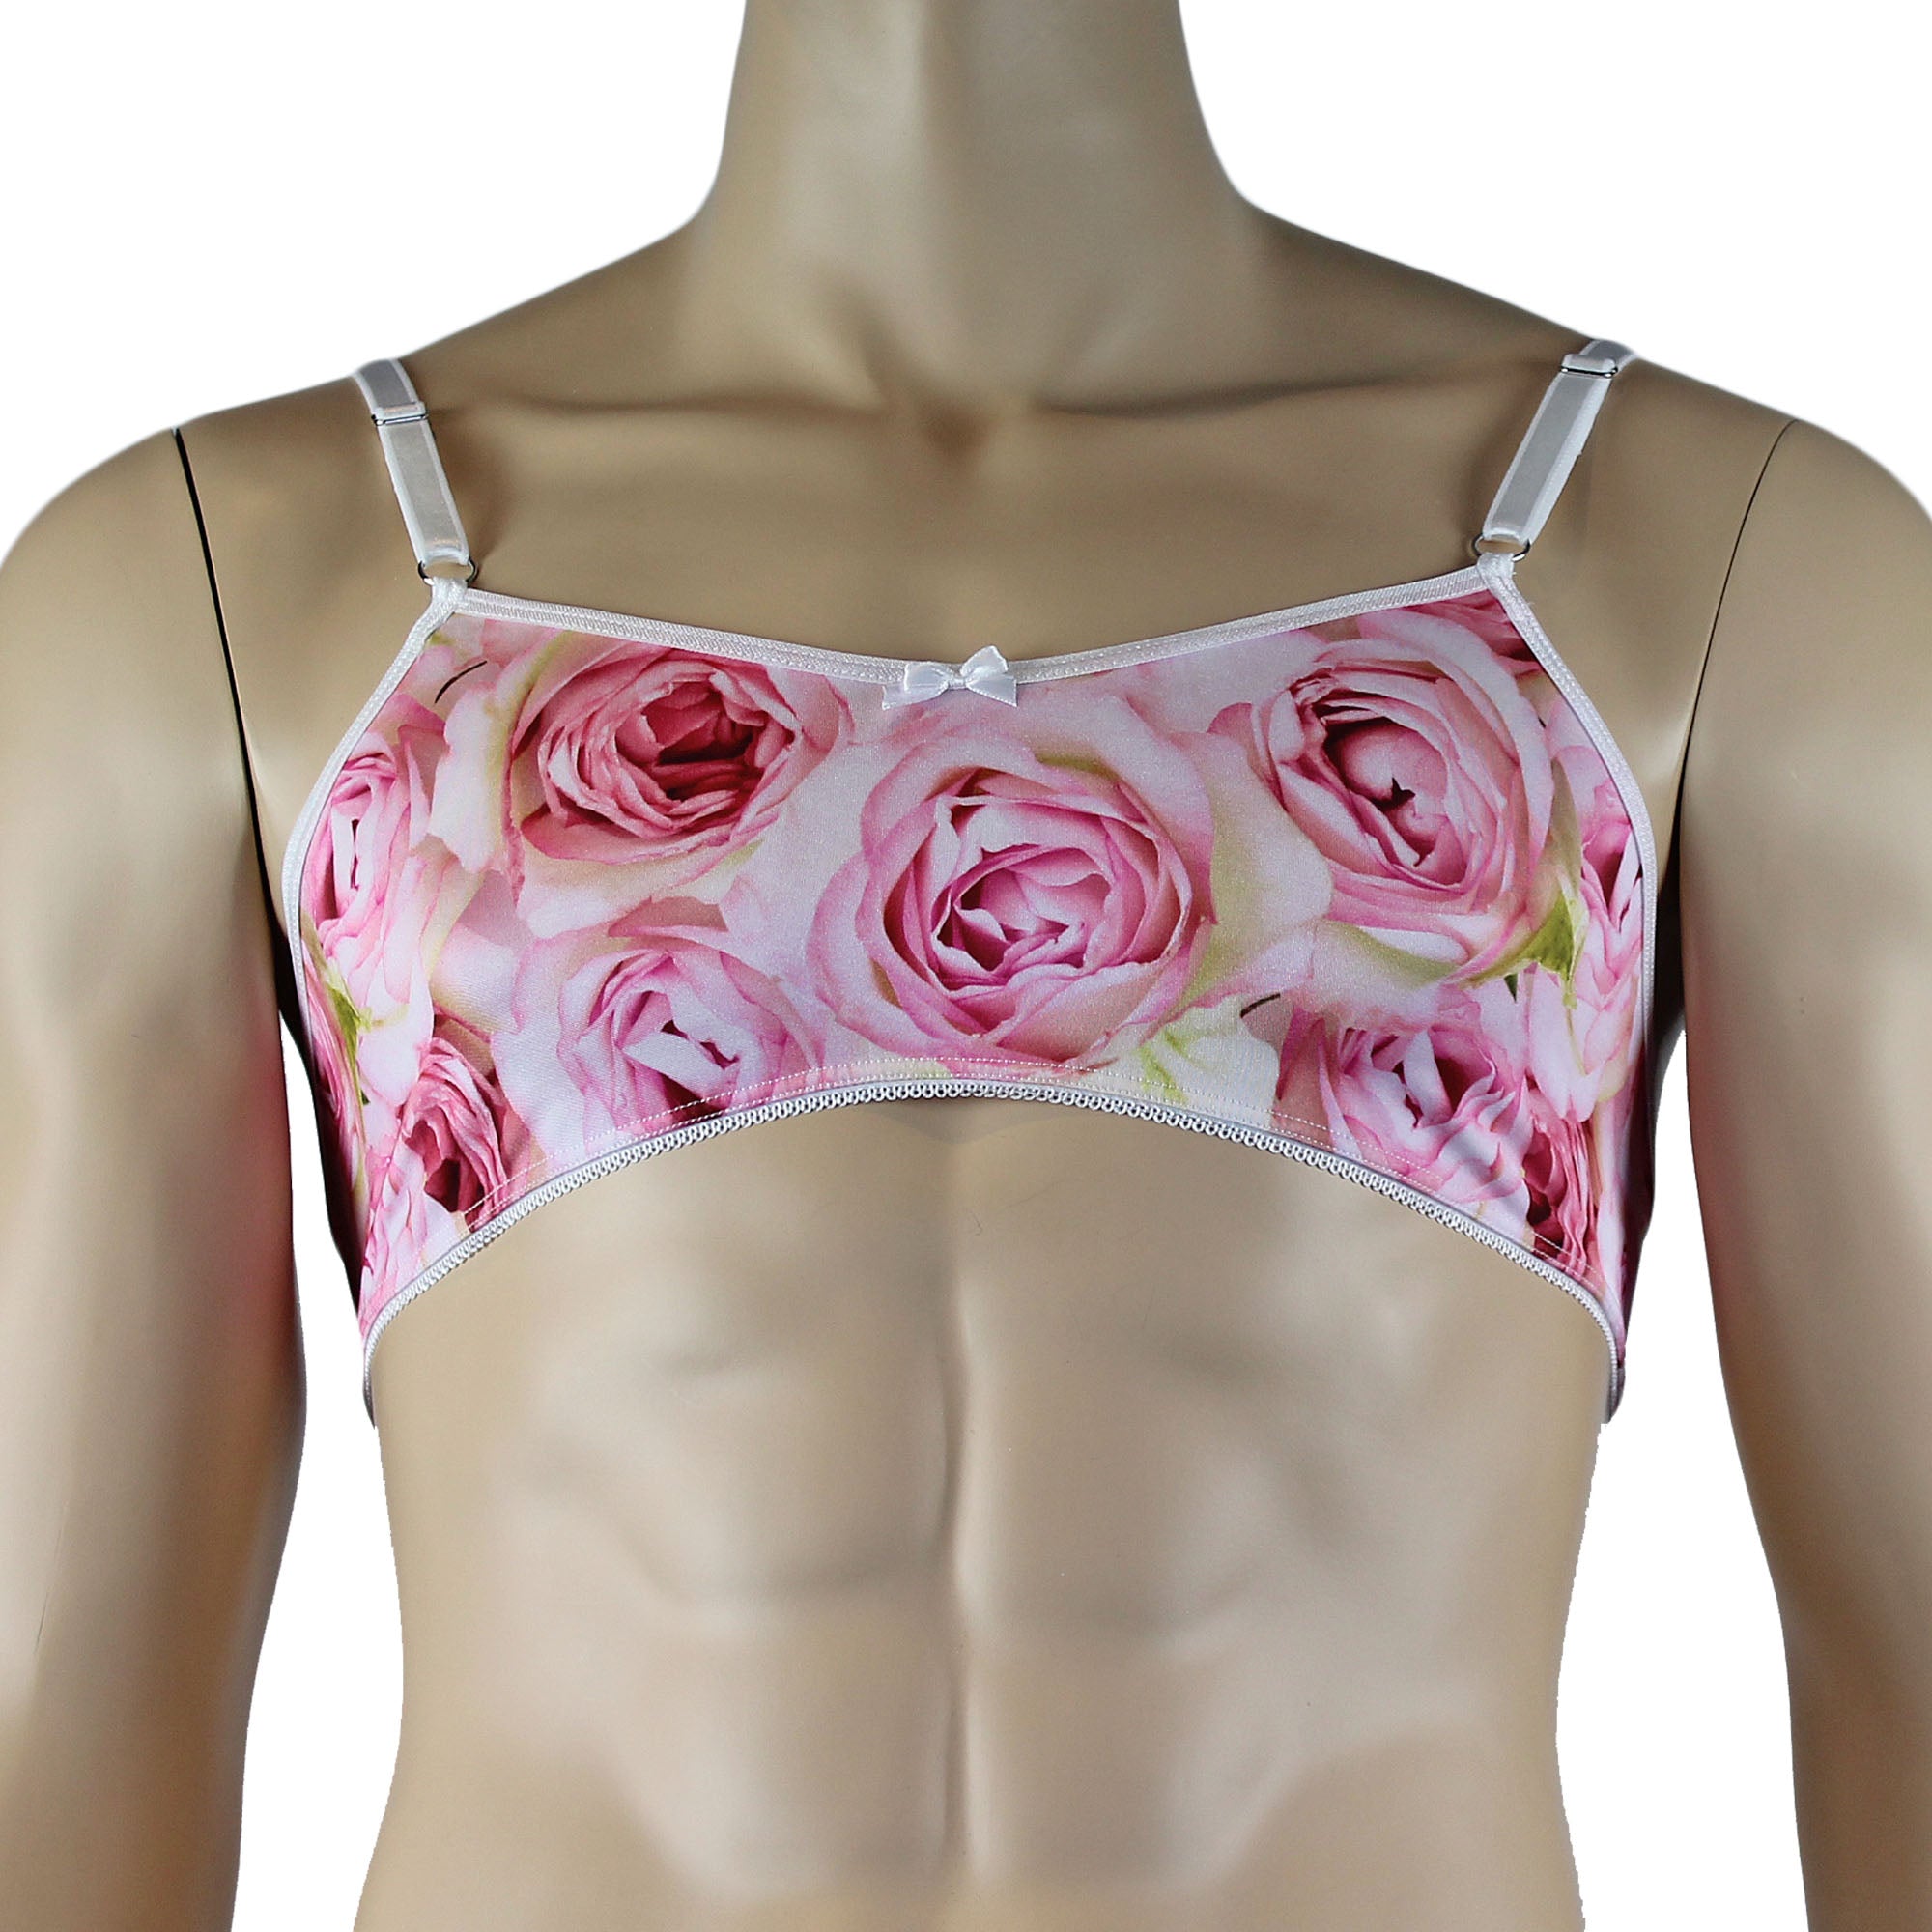 Mens Roses Spandex Bra Top with Frilled Pico Elastic Trim Male Lingerie Pink